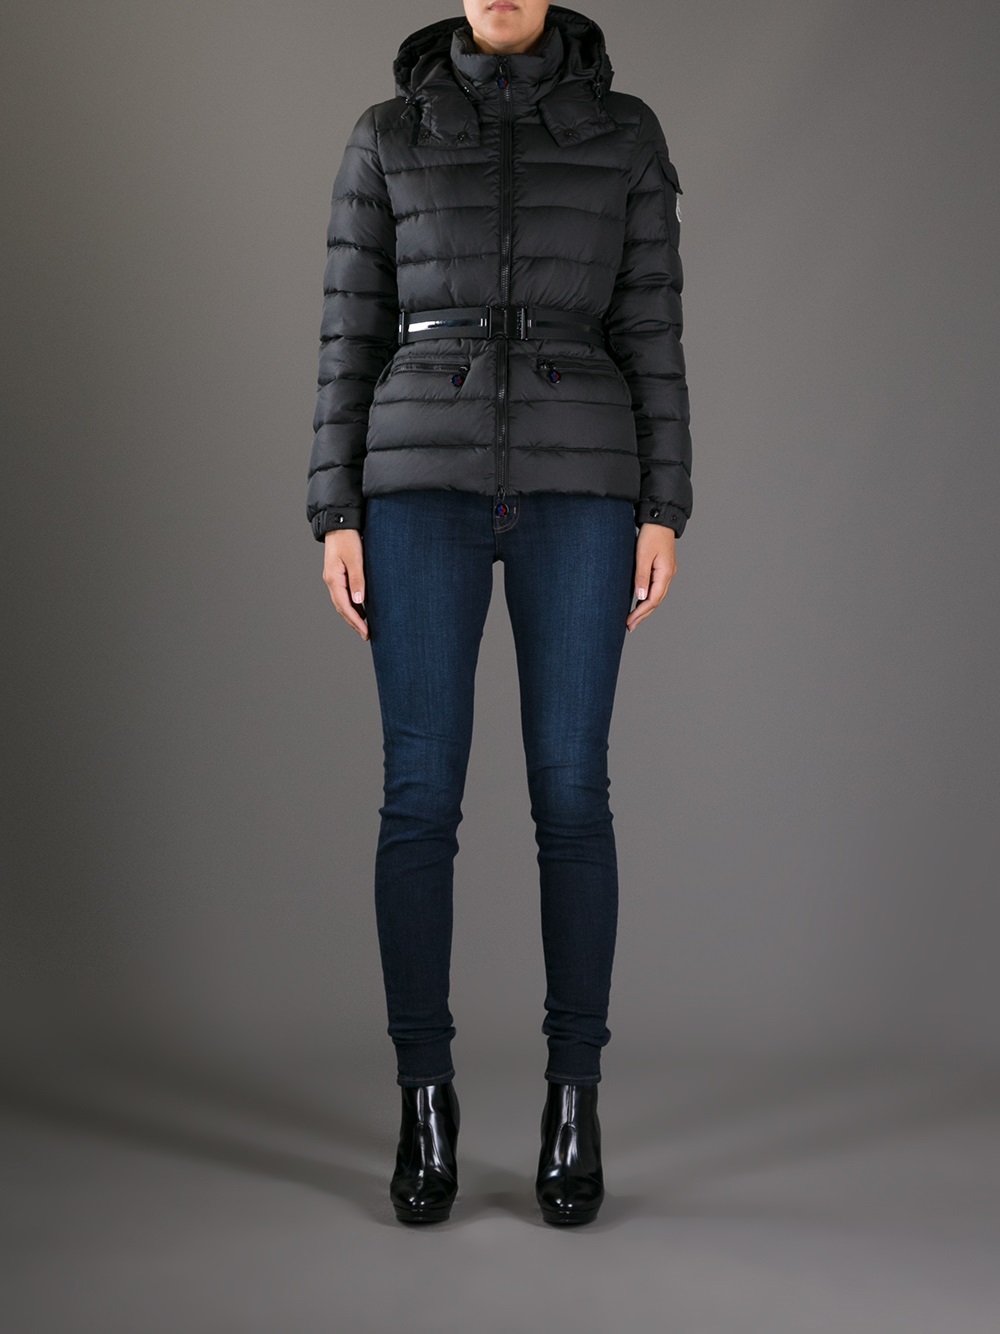 Moncler Bea Padded Jacket in Black - Lyst